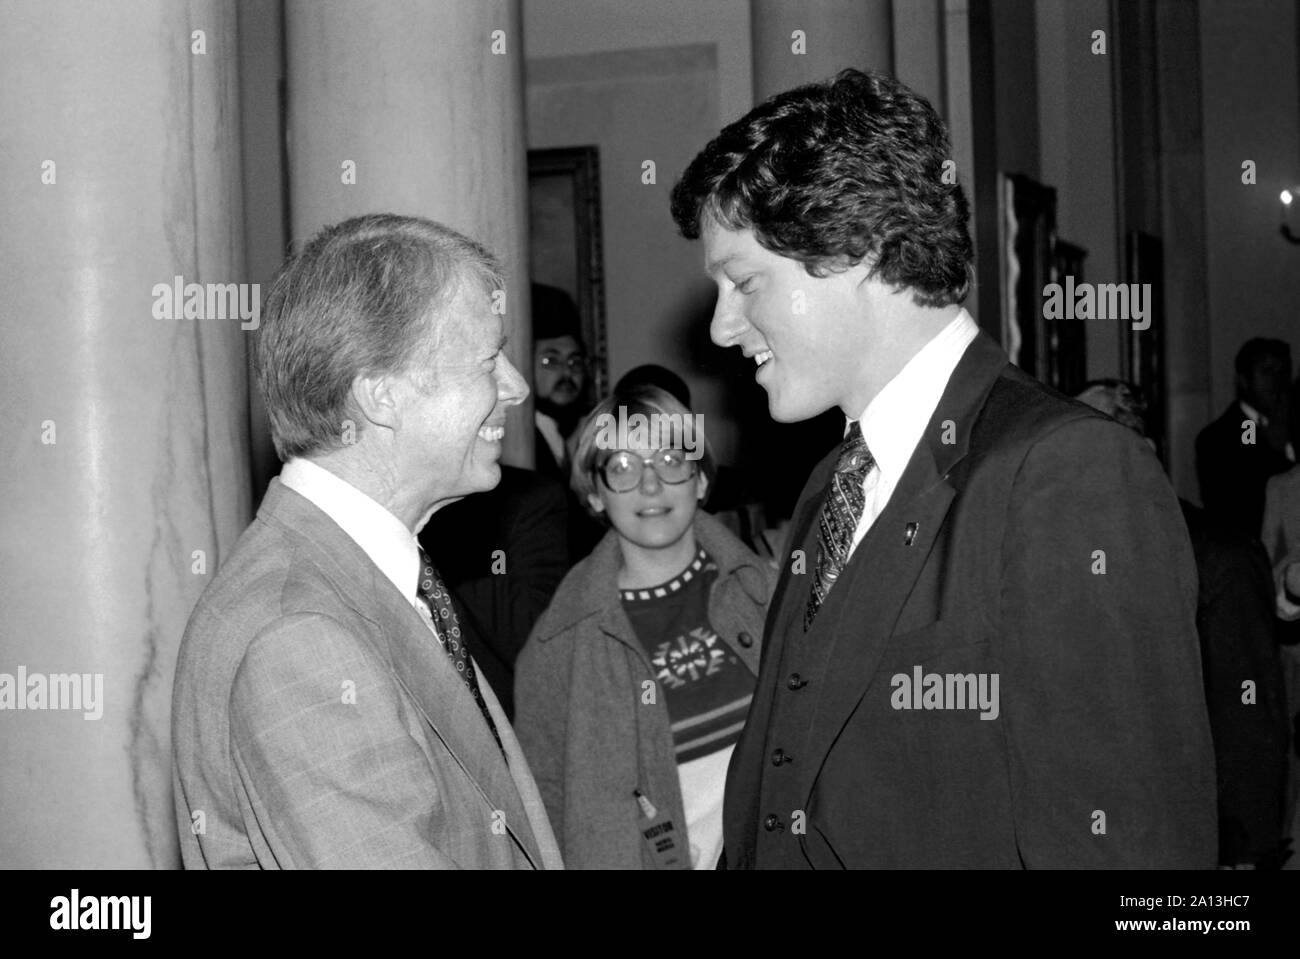 President Jimmy Carter greeting Bill Clinton at the White House, 1978. Stock Photo